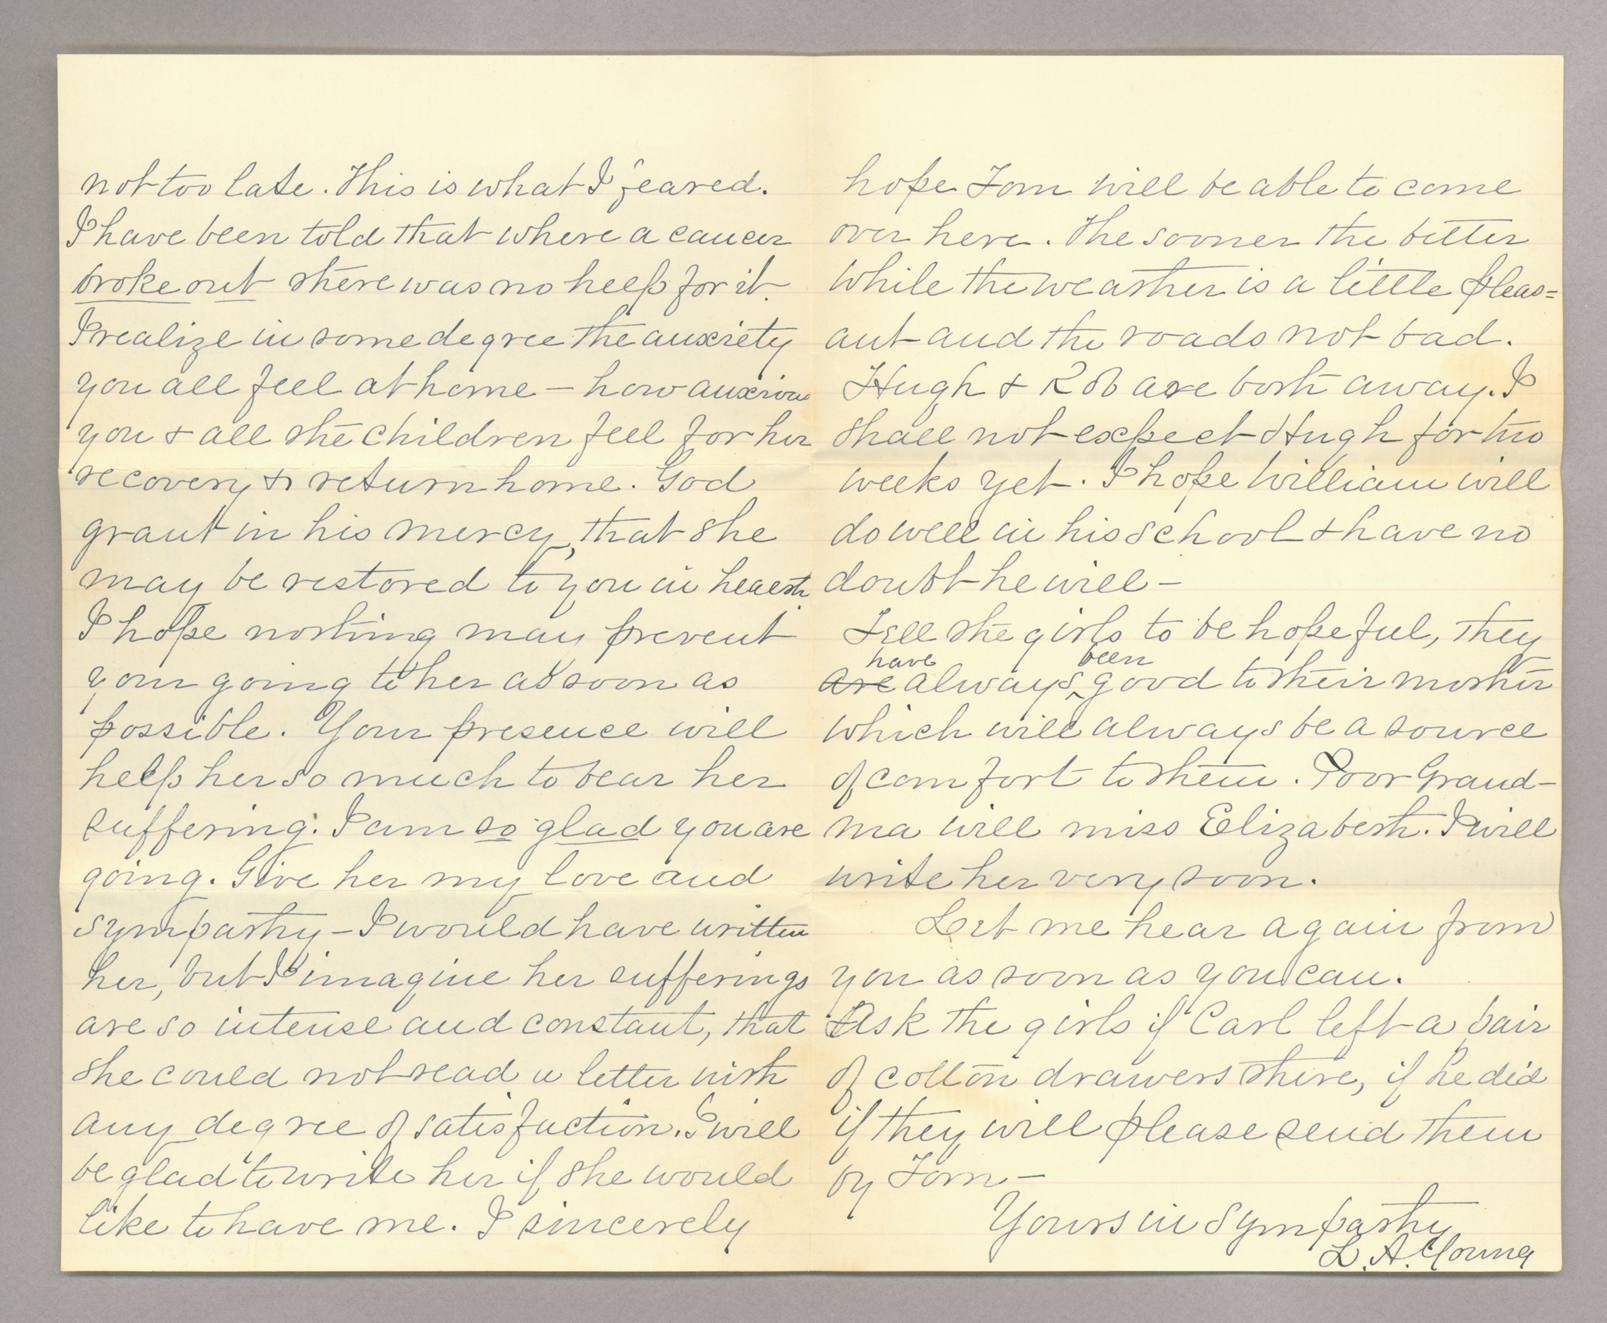 Letter. L. A. Young, Wellsboro, Pennsylvania, to Mr. John [E.] Brownlee, North Wharton, Pennsylvania, Pages 2-3